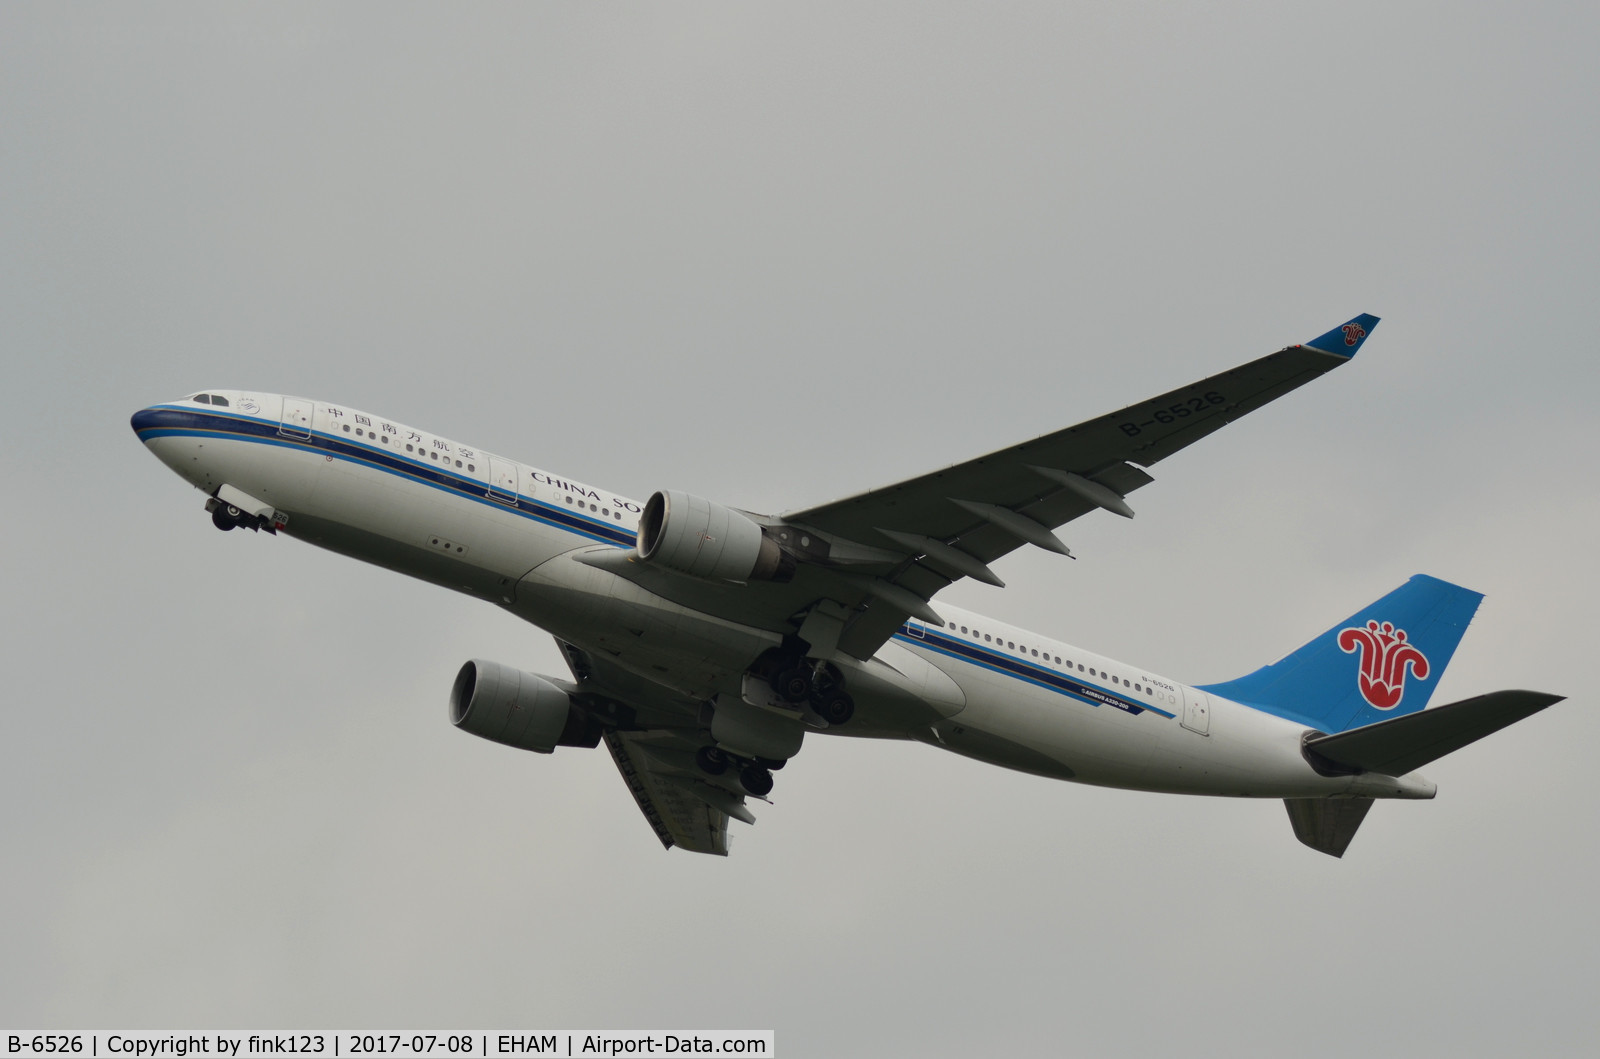 B-6526, 2011 Airbus A330-223 C/N 1220, CHINA SOUTHERN A330 TAKING OF